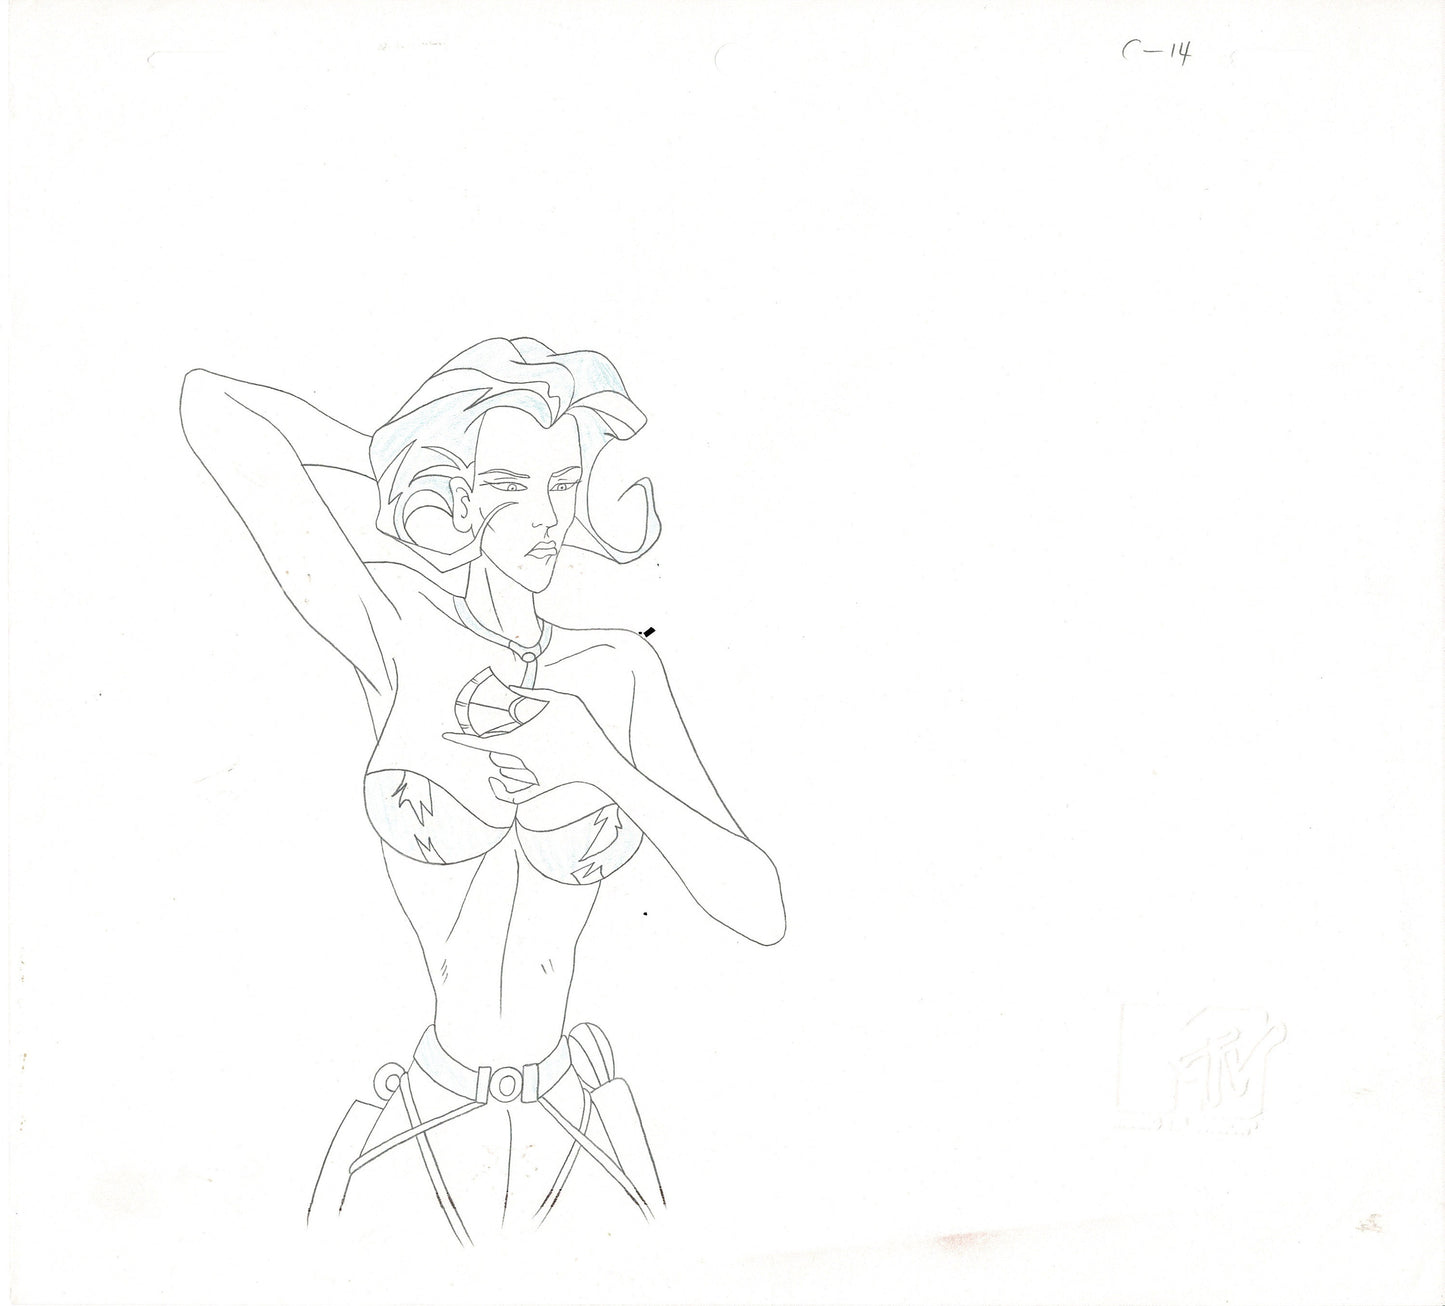 Aeon Flux Original Production Animation Cel Drawing from MTV 1991-1995 with MTV COA and Seal pm